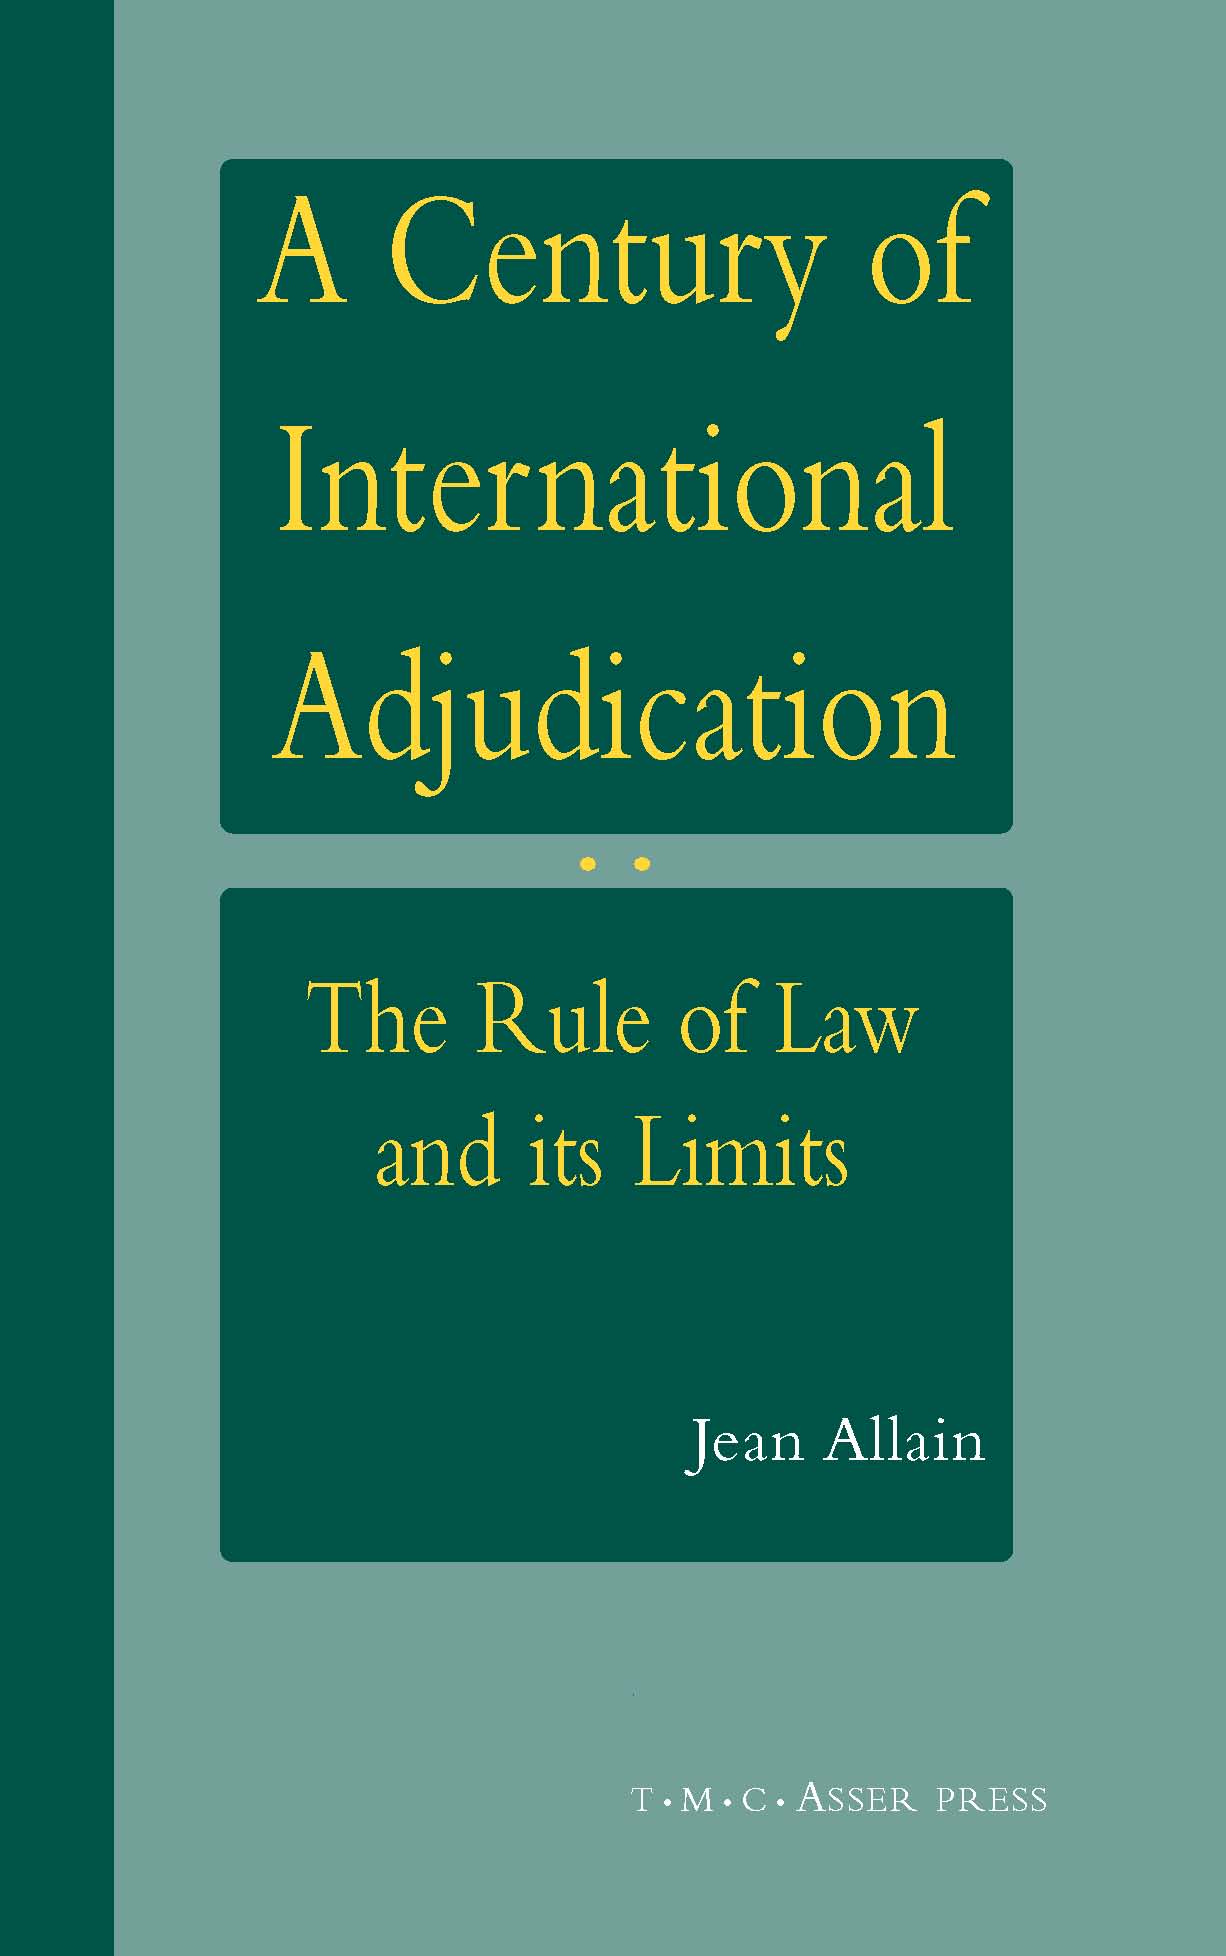 A Century of International Adjudication - The Rule of Law and its Limits